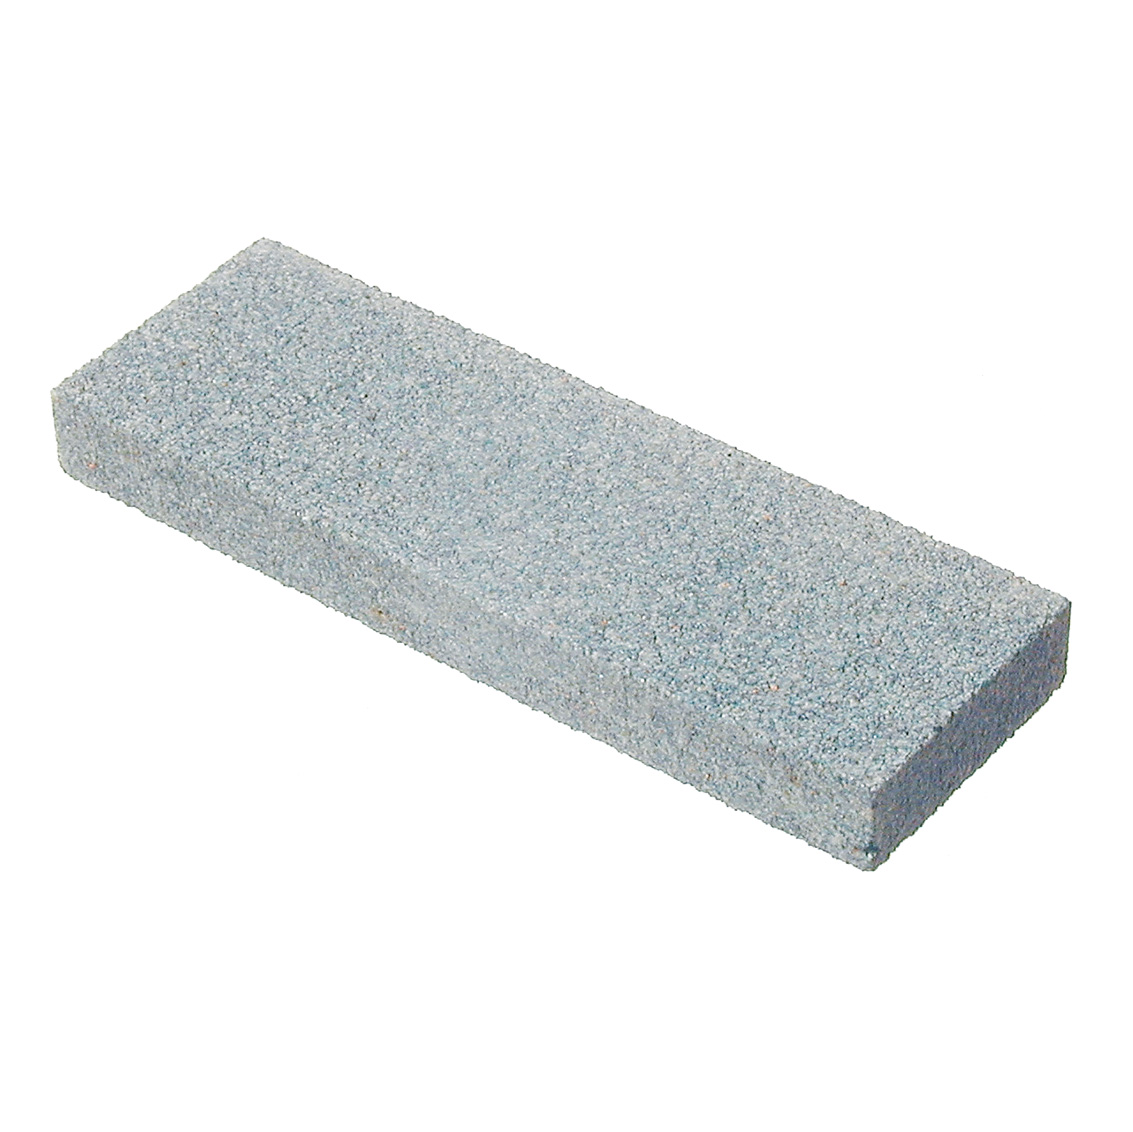 Medium grit stone for cleaning cutters